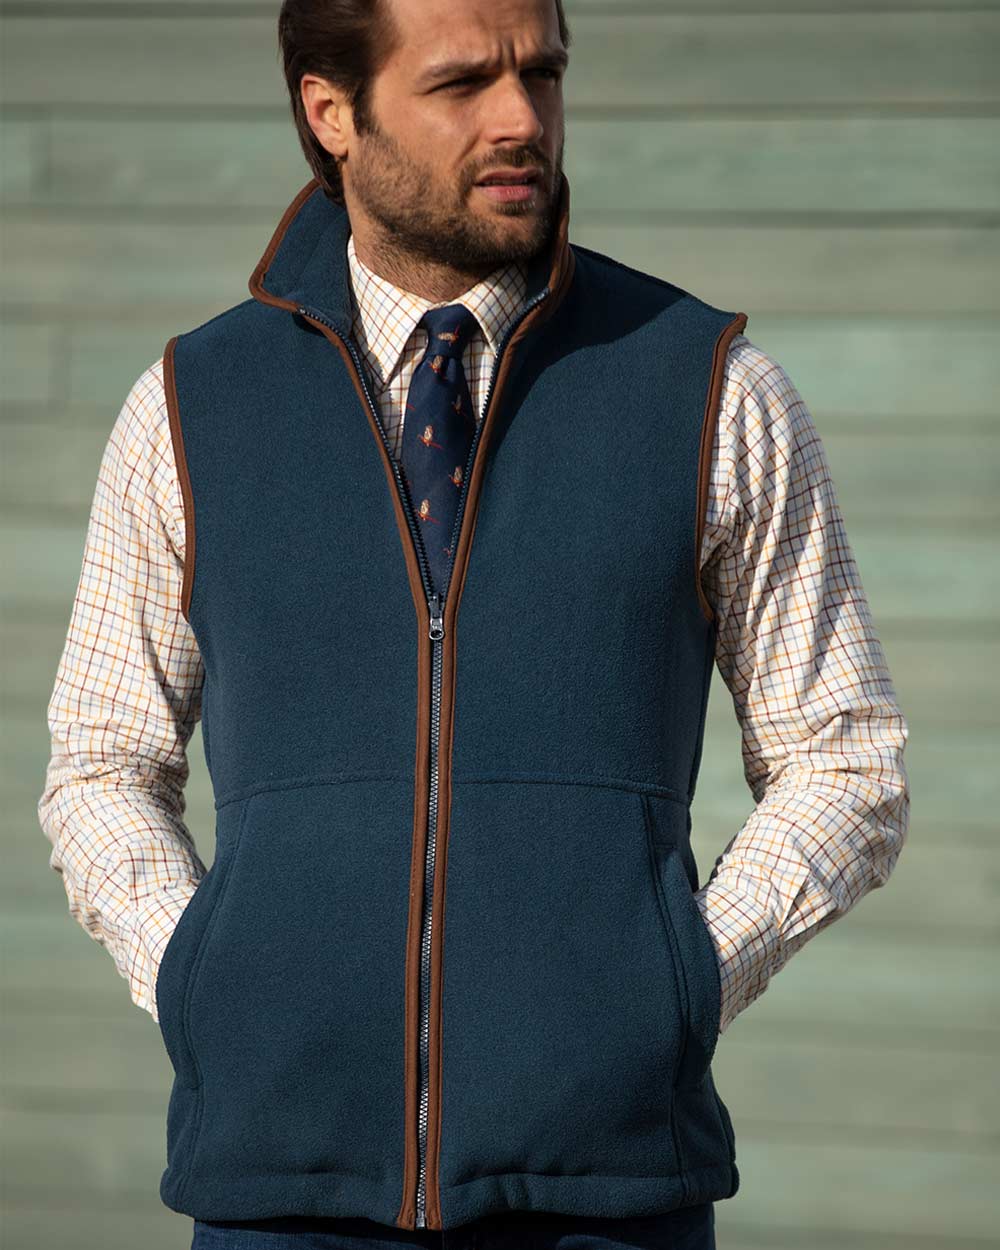 Man with tie and tattersall shirt wearing Alan Paine Aylsham Fleece Gilet in Blue Steel 